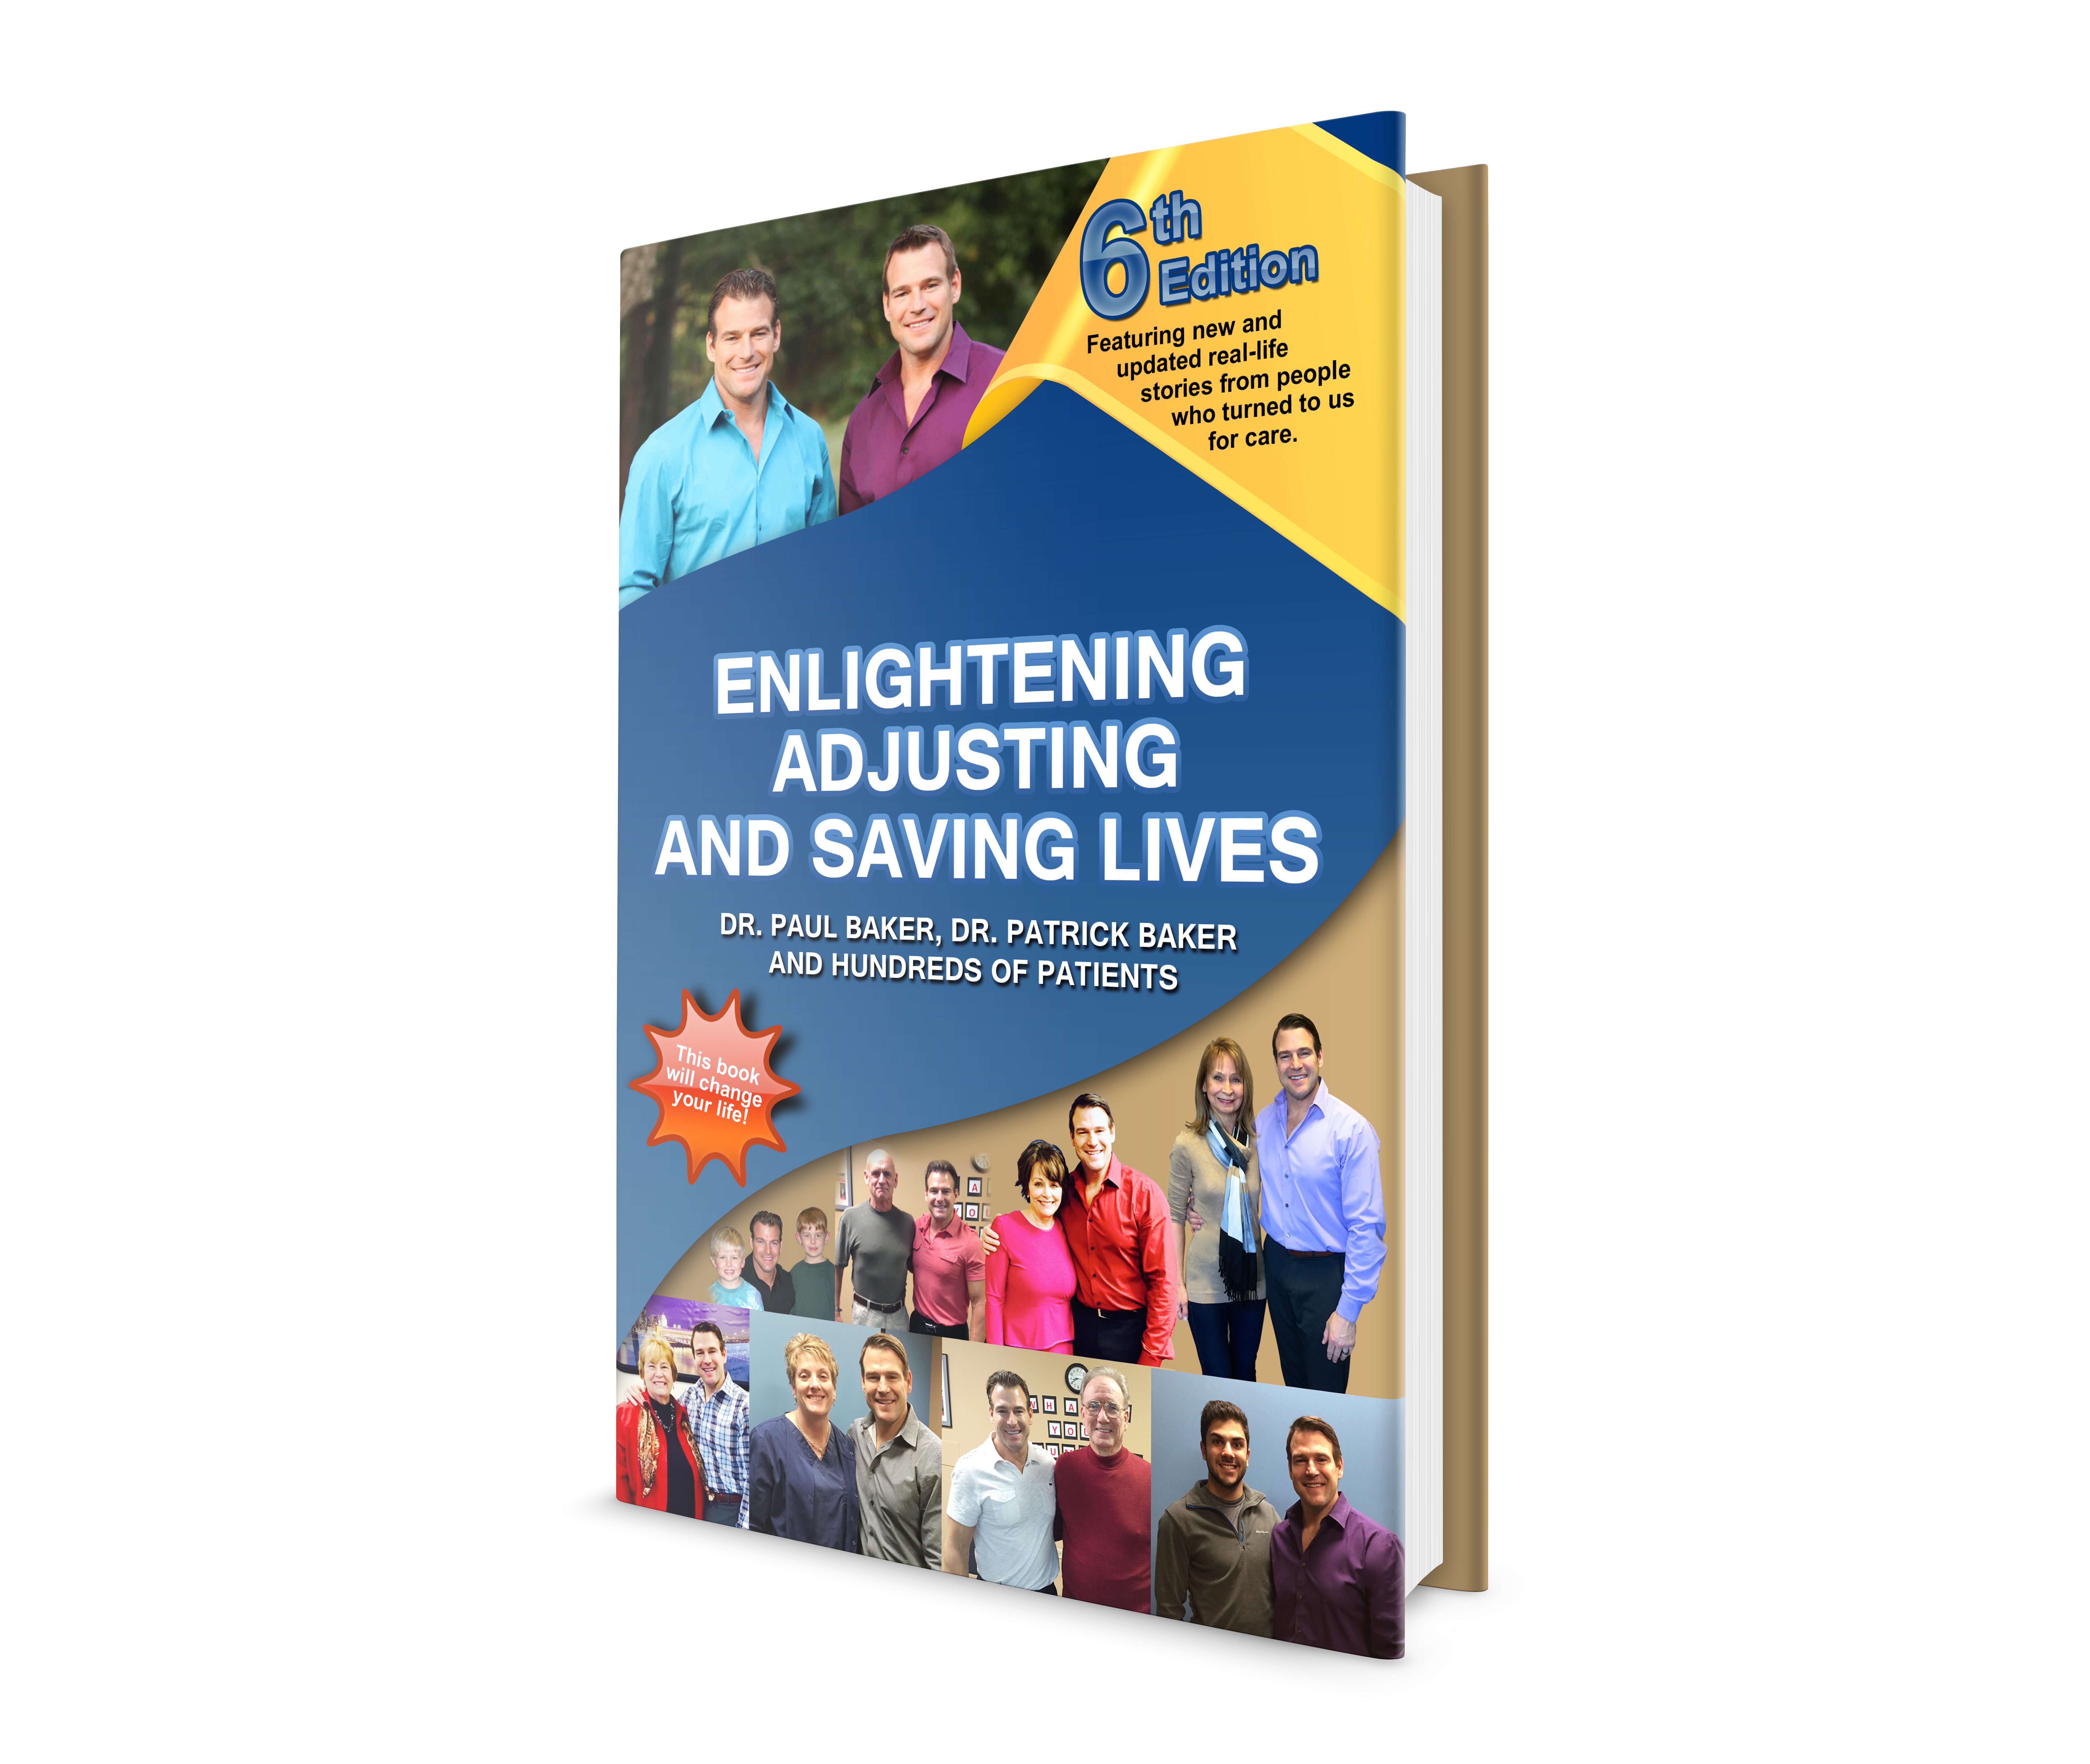 6th Edition of Enlightening, Adjusting and Saving Lives